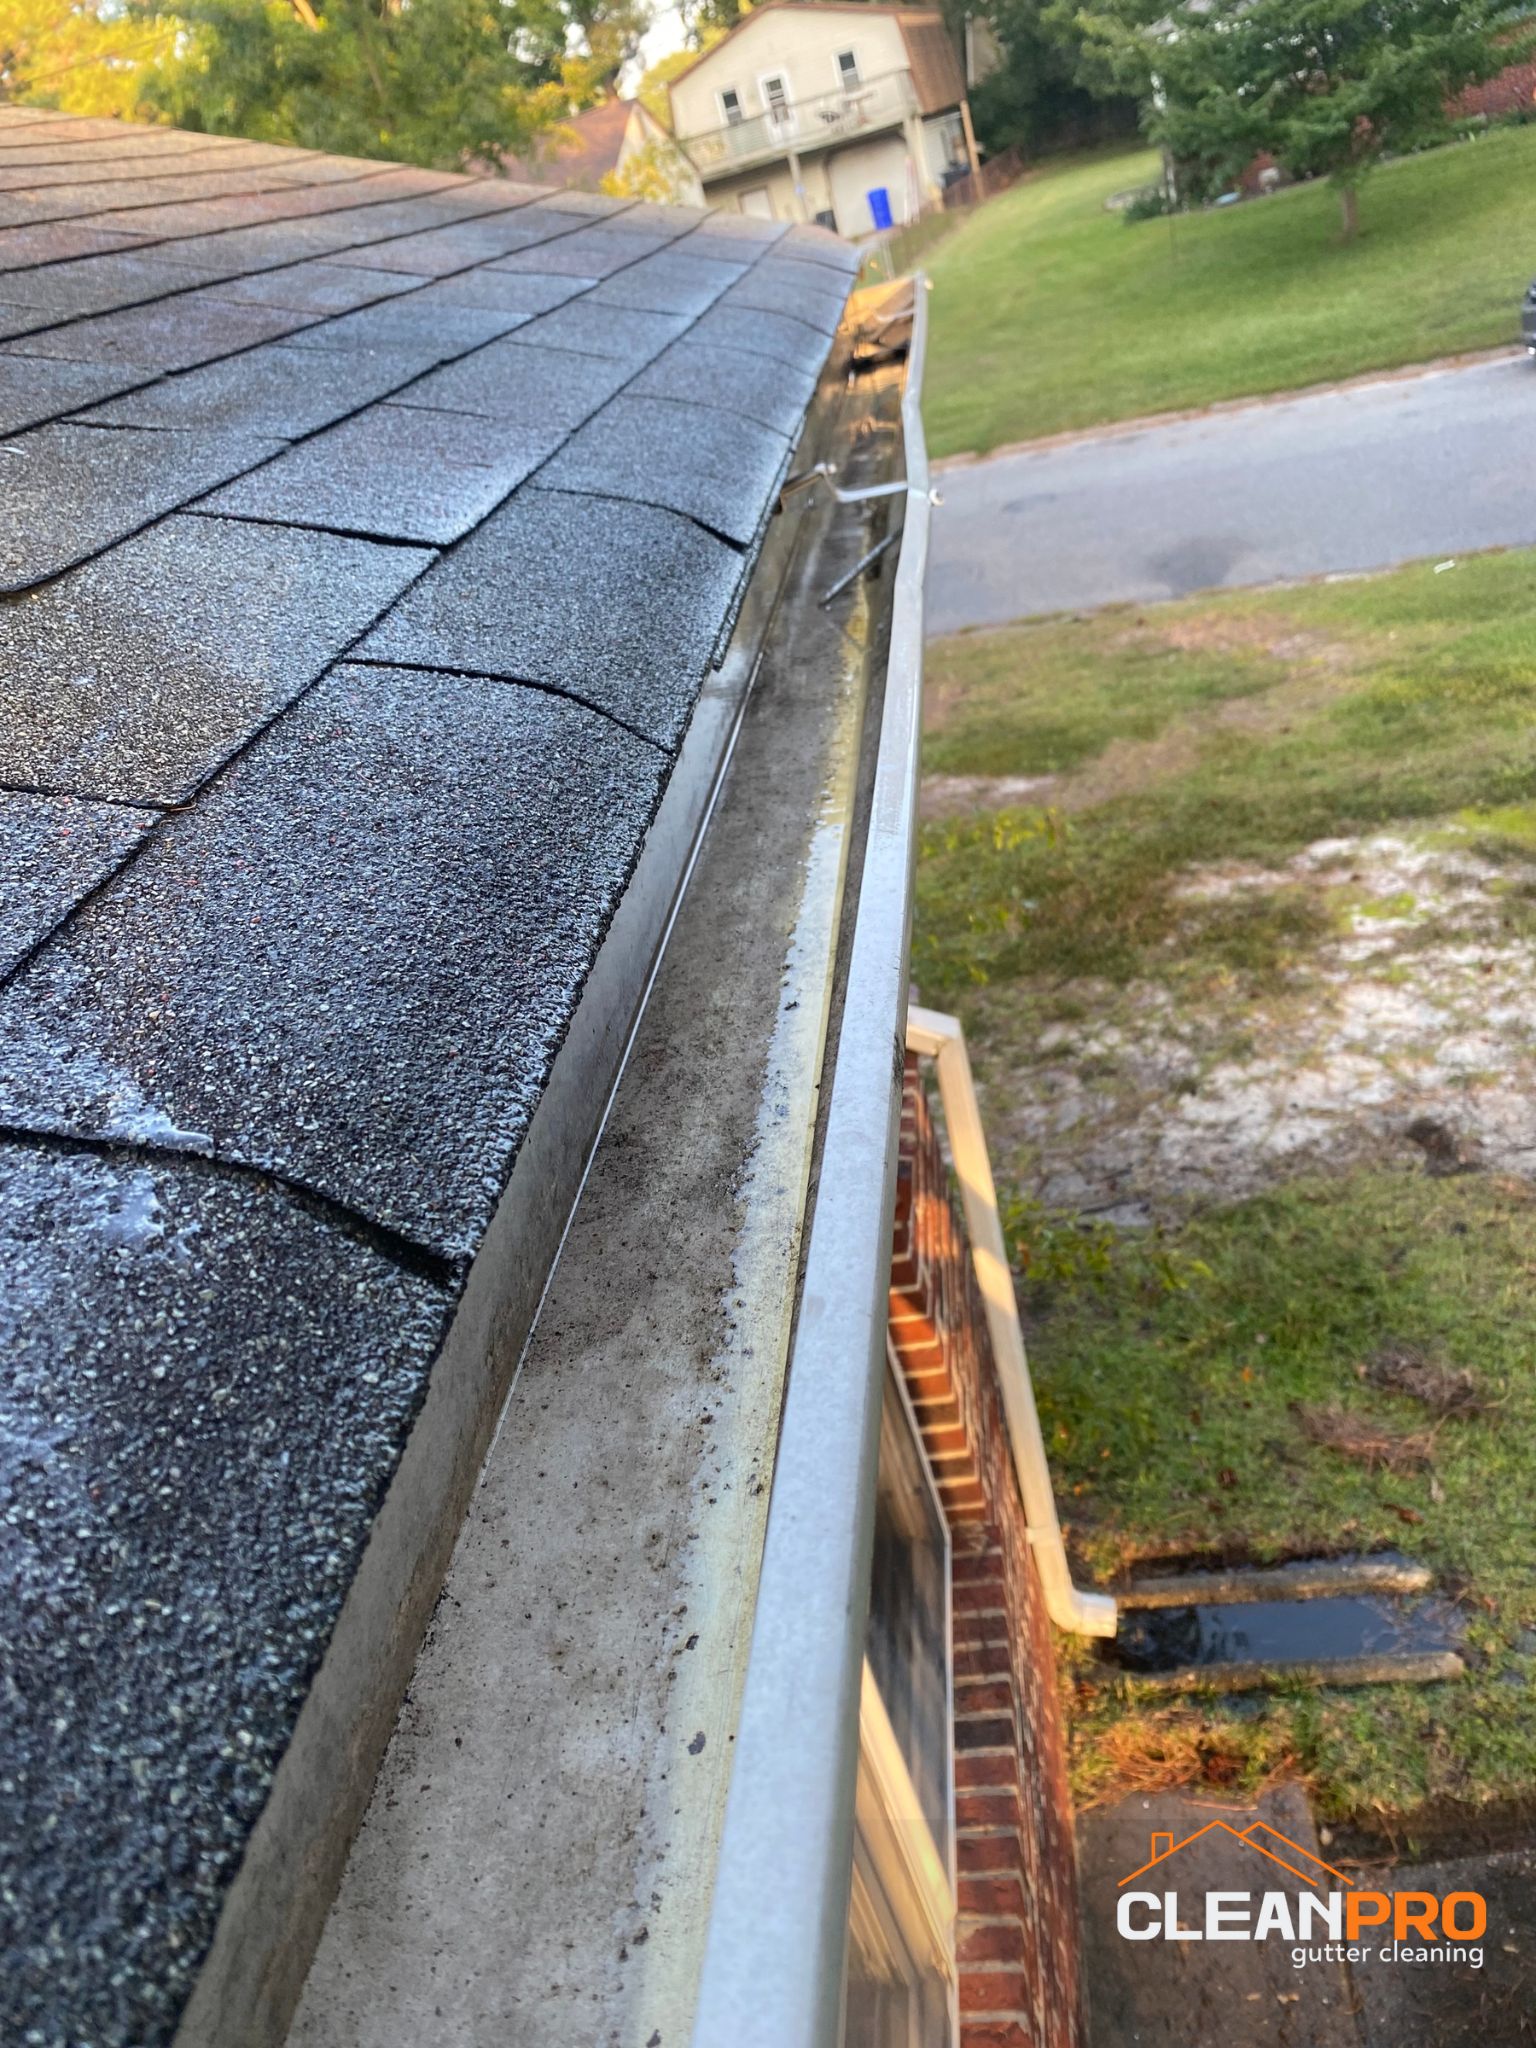 Quality Gutter Cleaning in Naperville IL